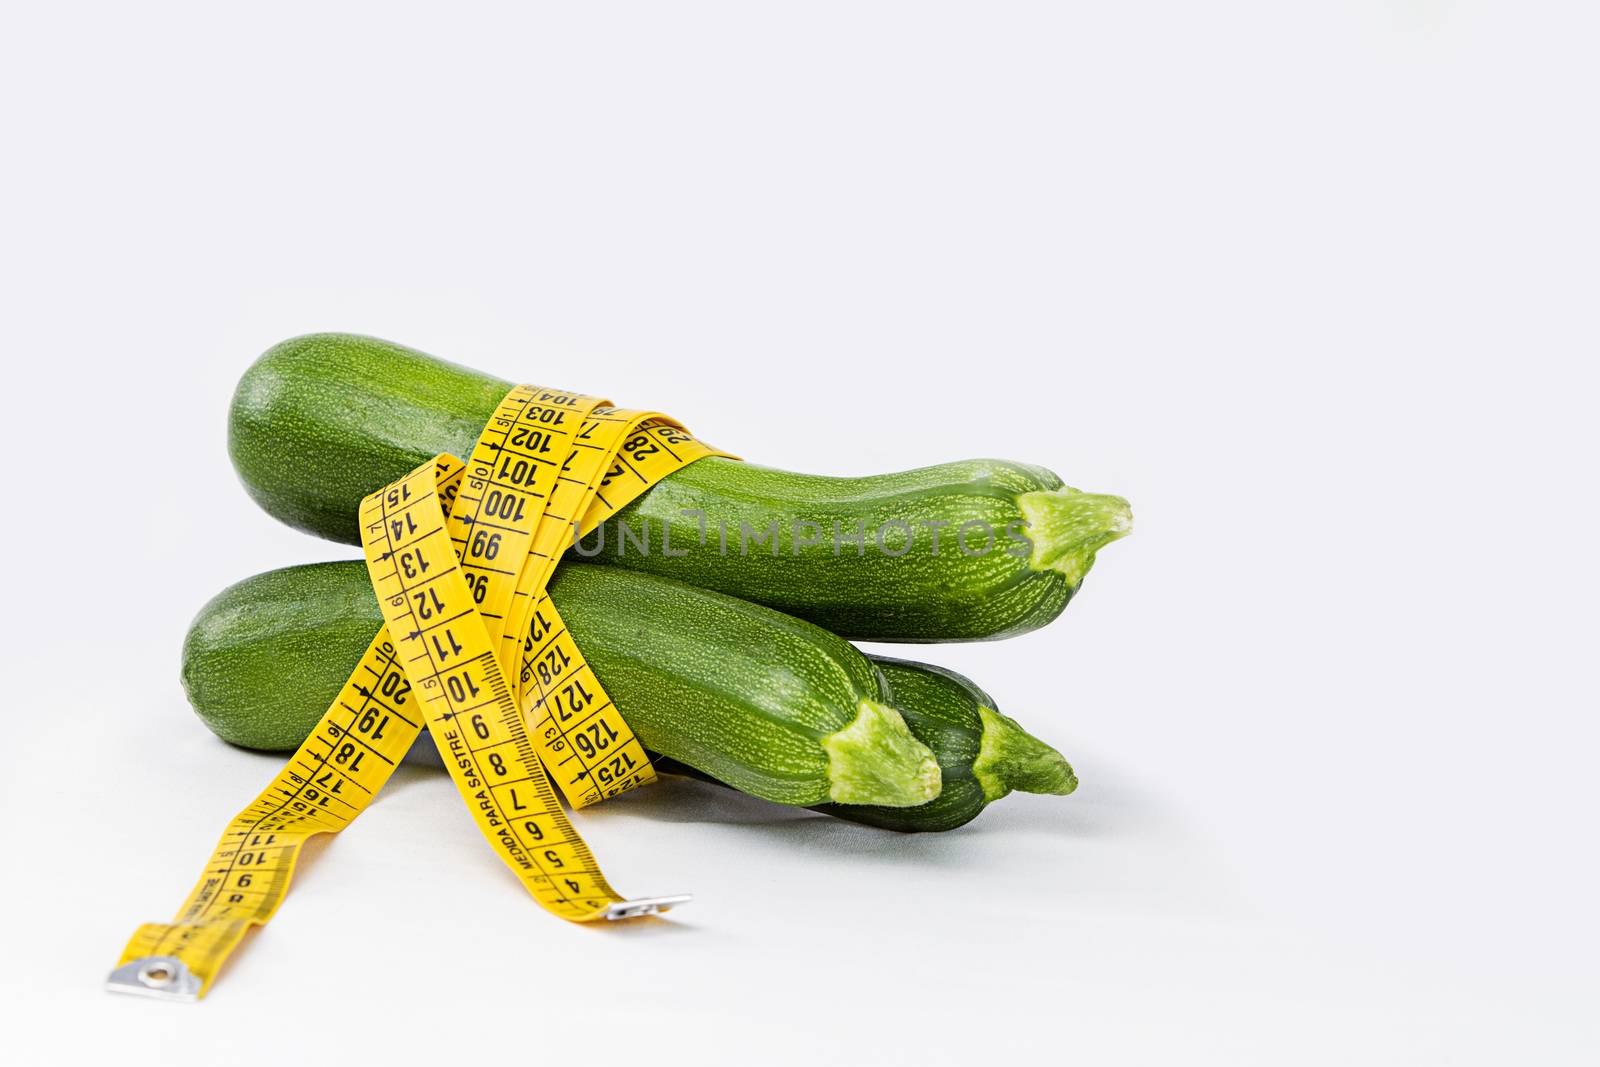 Vegetarian diet to reduce weight. Three freshly picked courgettes wrapped in a body measuring tape ruler that symbolizes the waistline